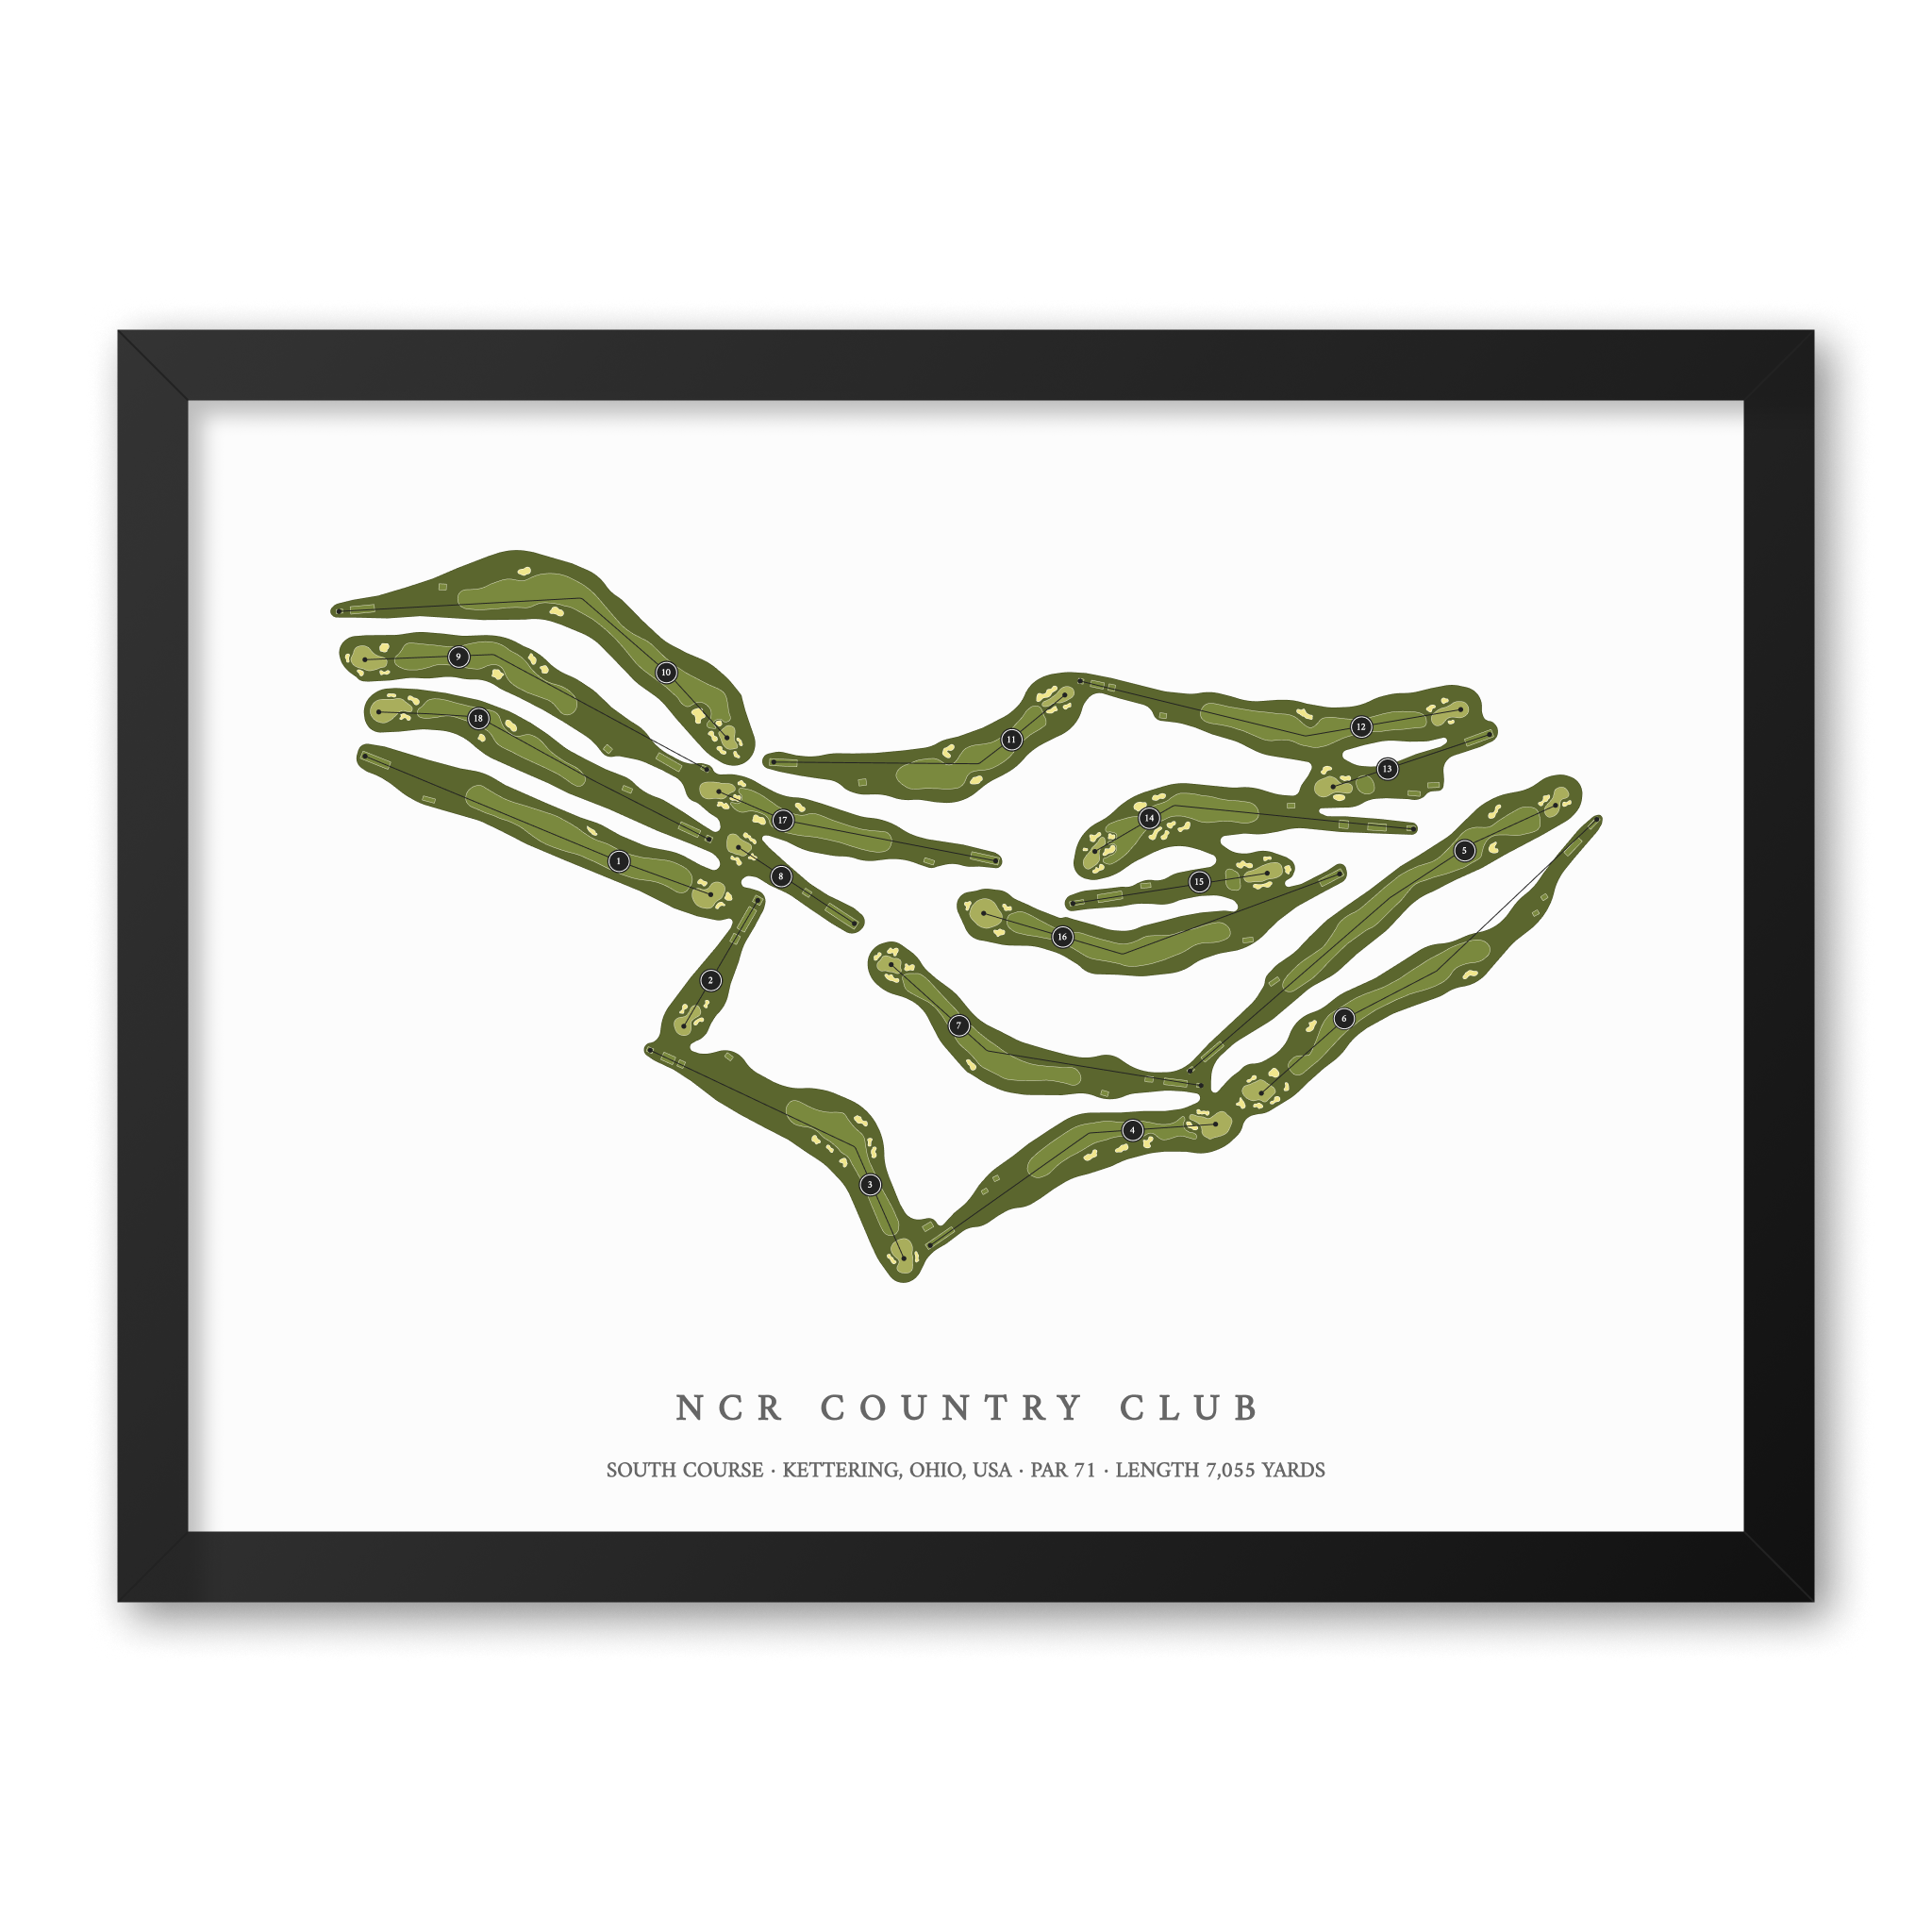 NCR Country Club - South Course| Golf Course Print | Black Frame With Hole Numbers #hole numbers_yes